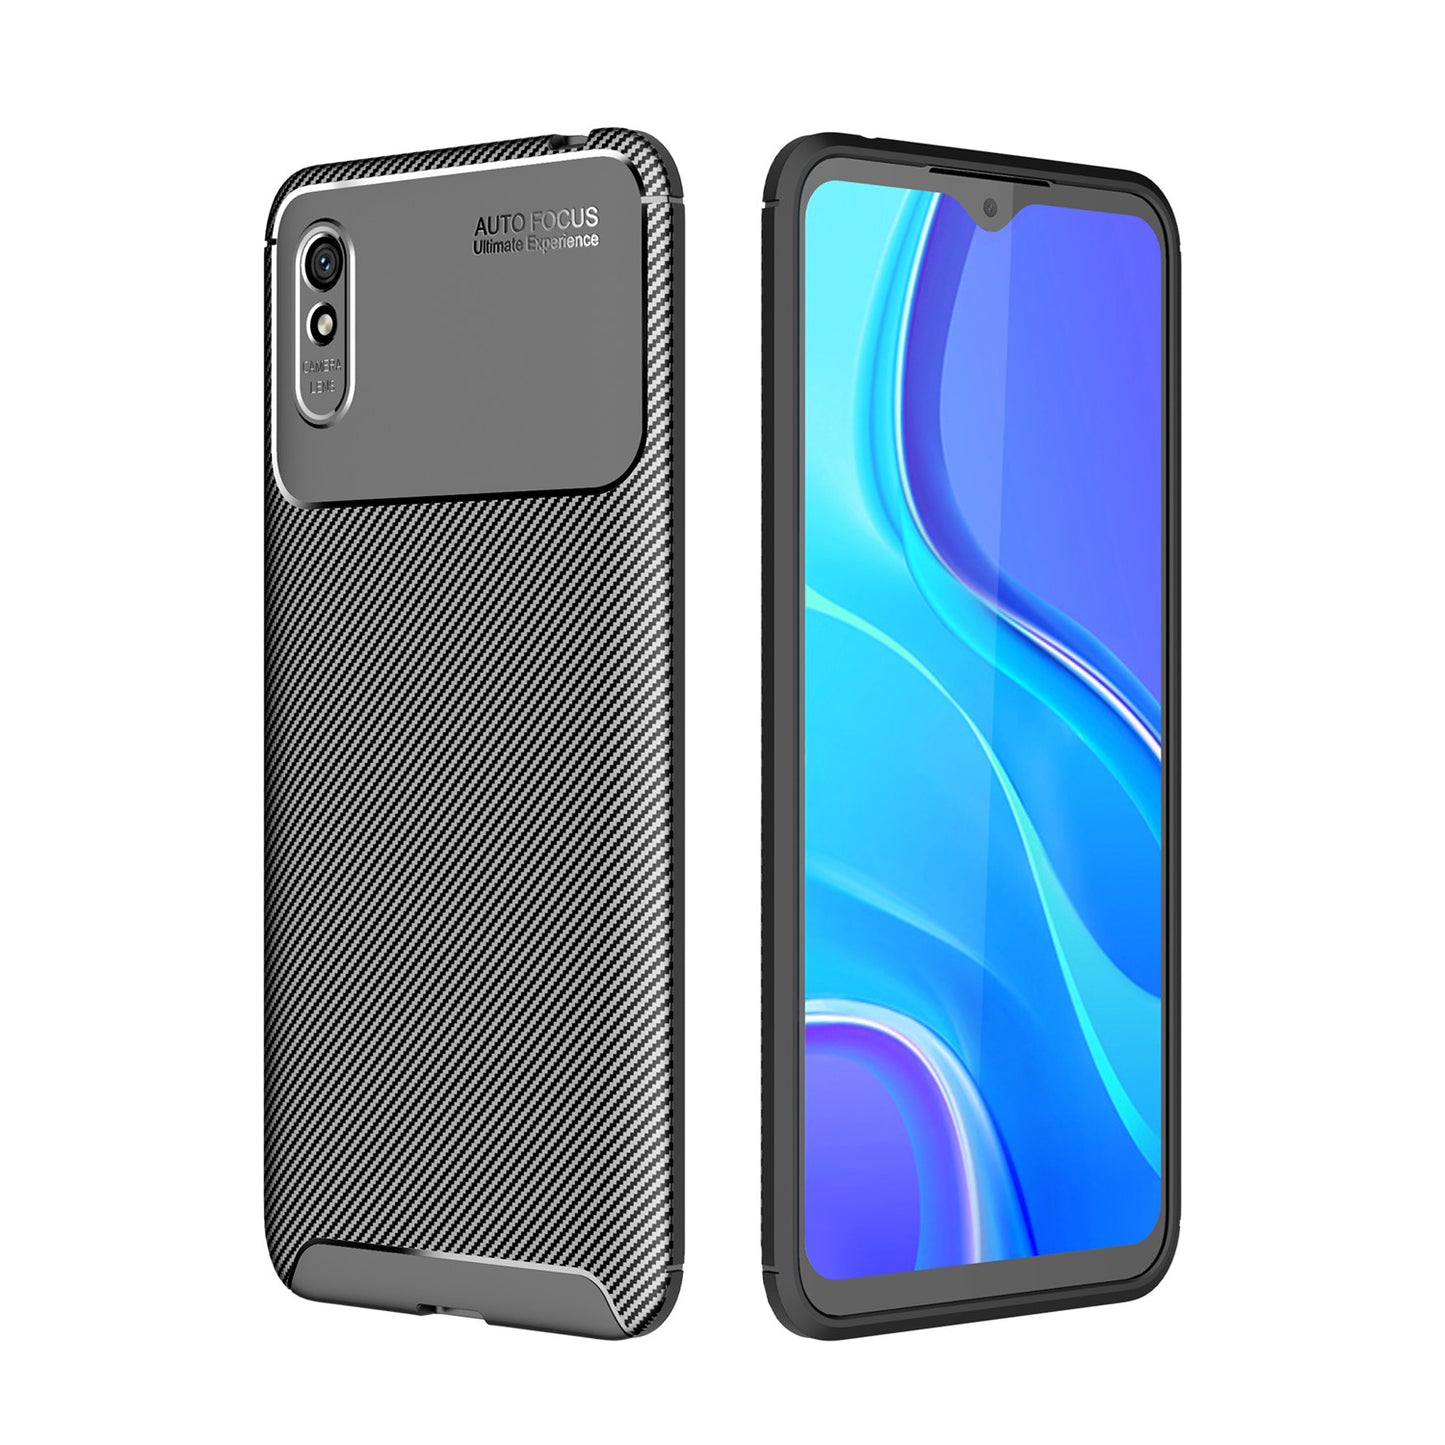 Elegant Redmi 9A back cases and covers (Carbon Black)